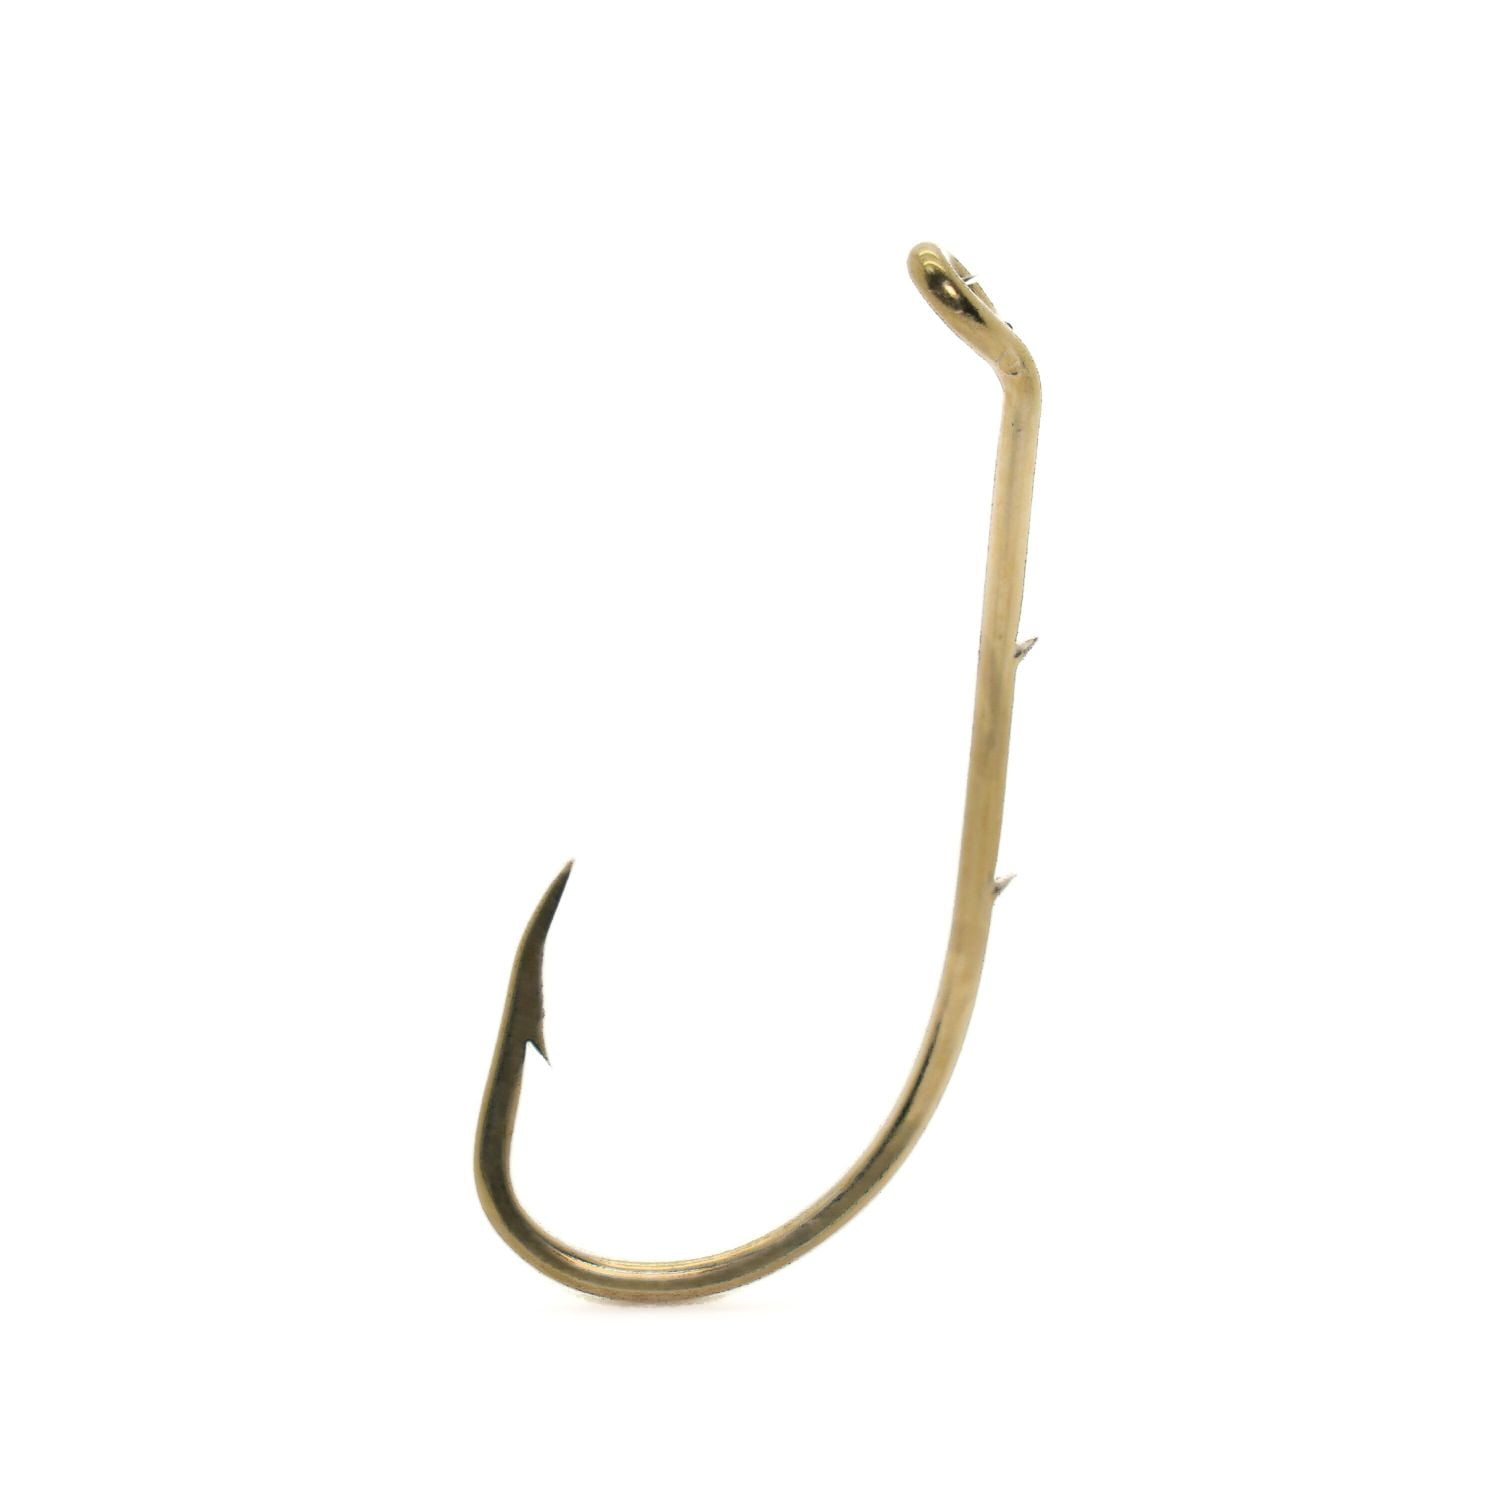 Generic Long Shank Hooks For Fishing 100pcs 1/0-6/0 High Carbon Steel Sharp  Barbed Offset Narrow Bait Hook Fishing Tackle Accessories